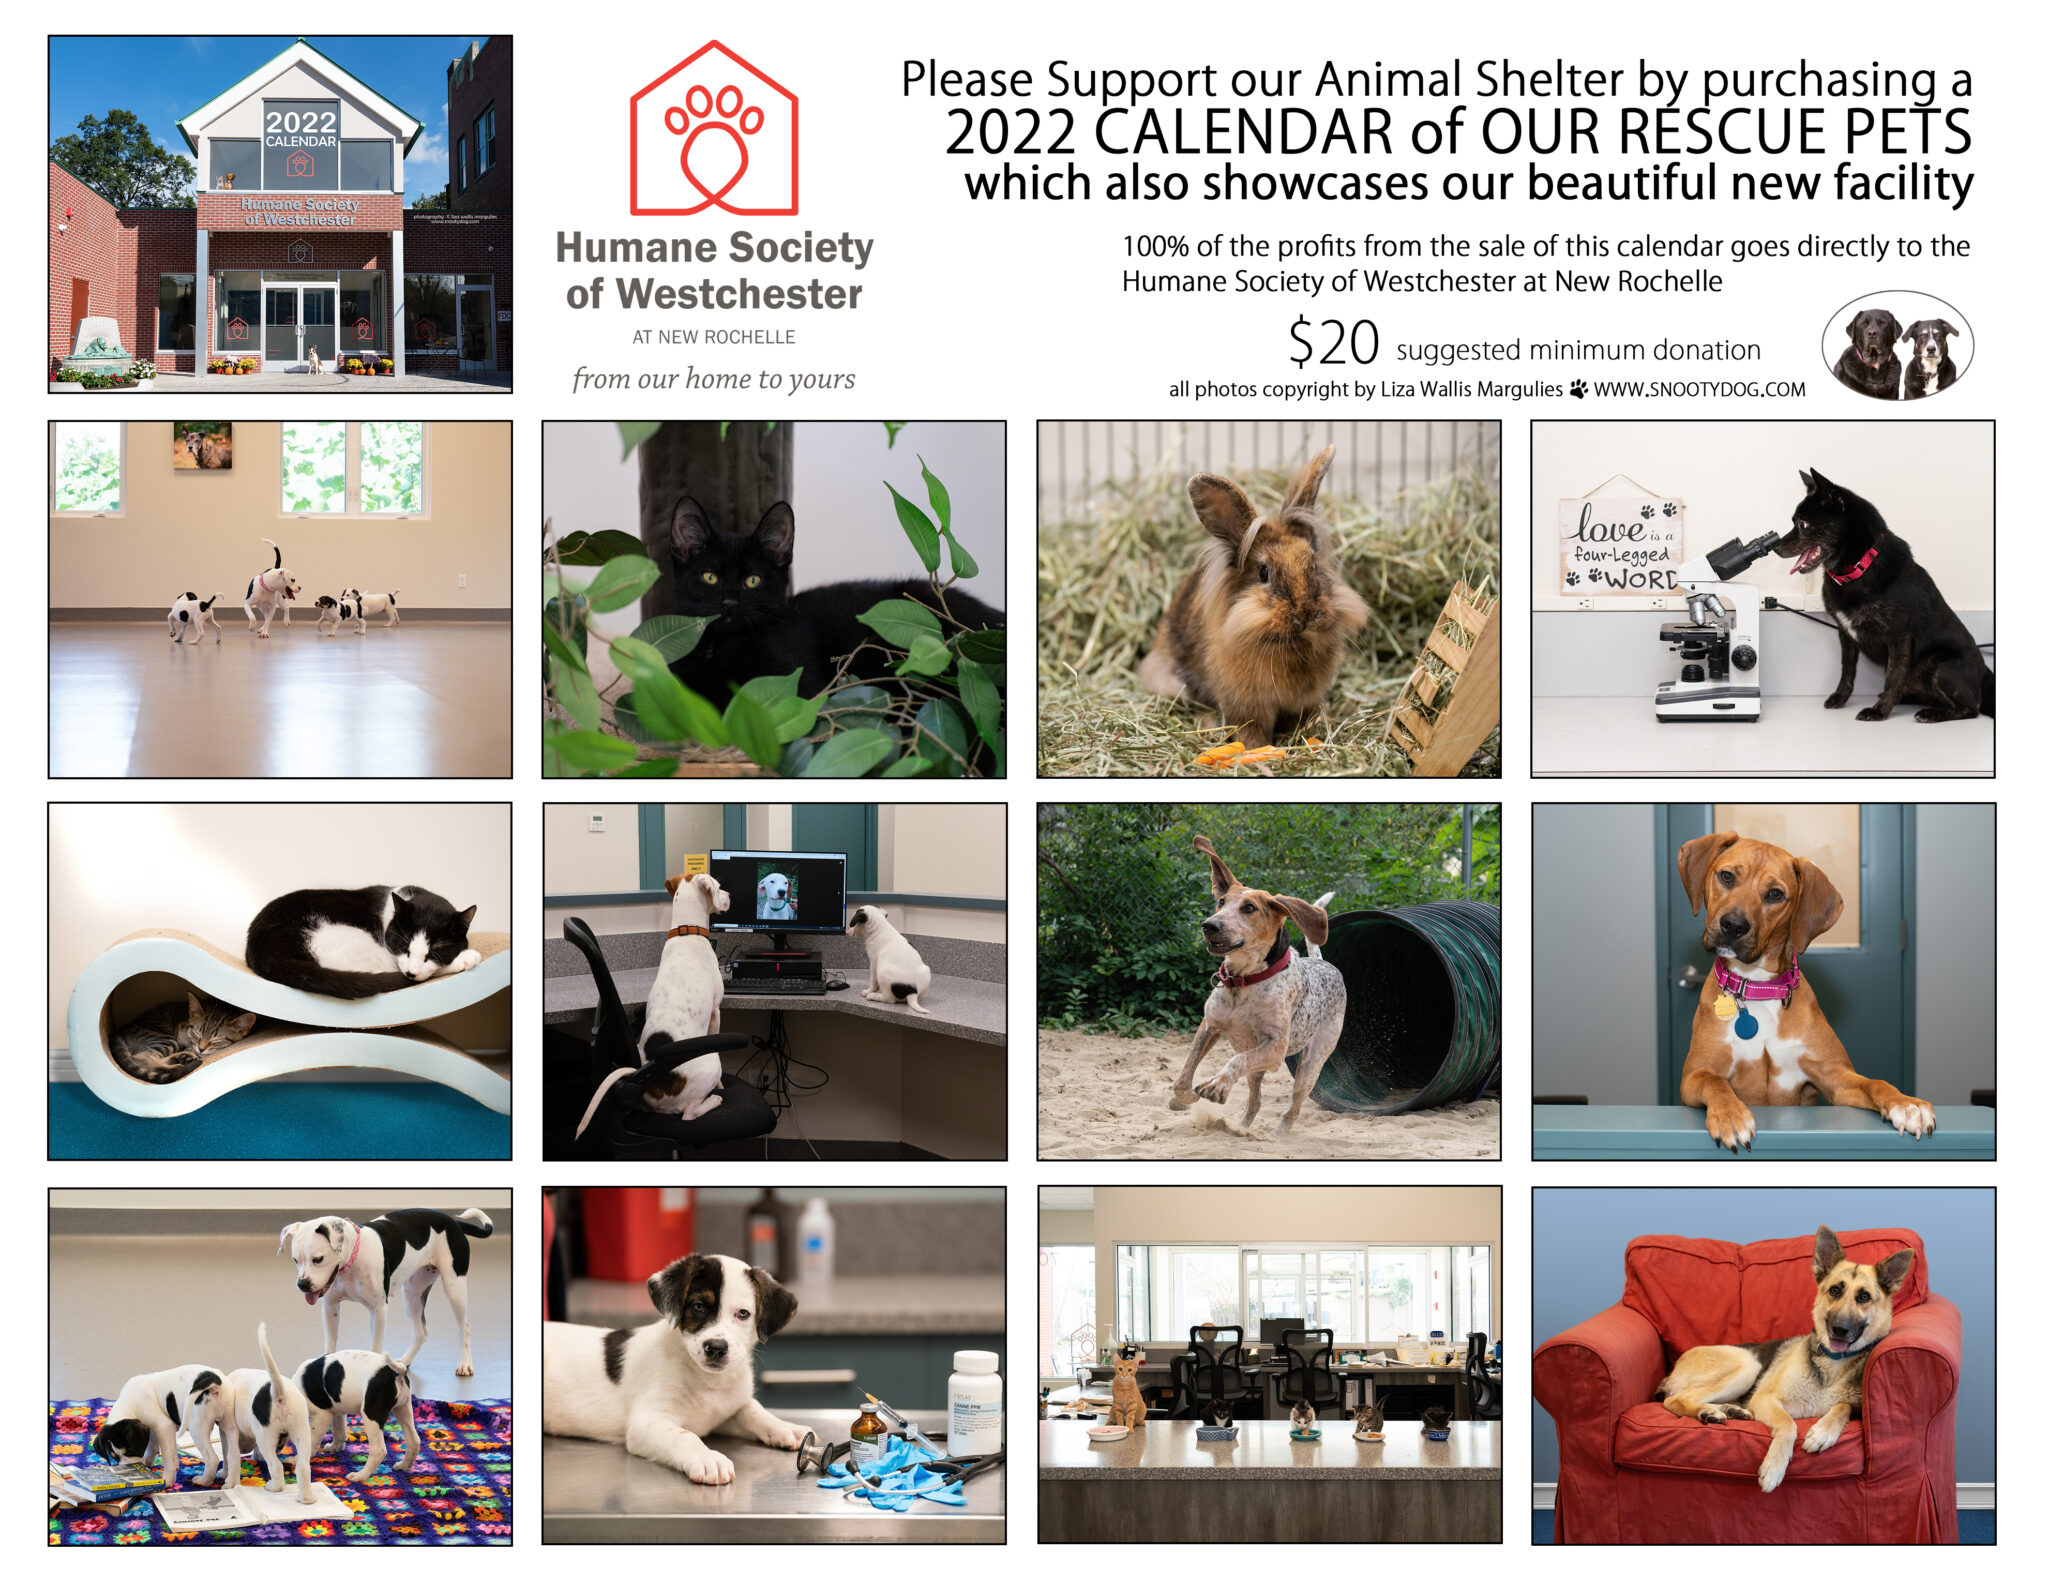 The Humane Society of Westchester’s 2022 Calendar! Humane Society of